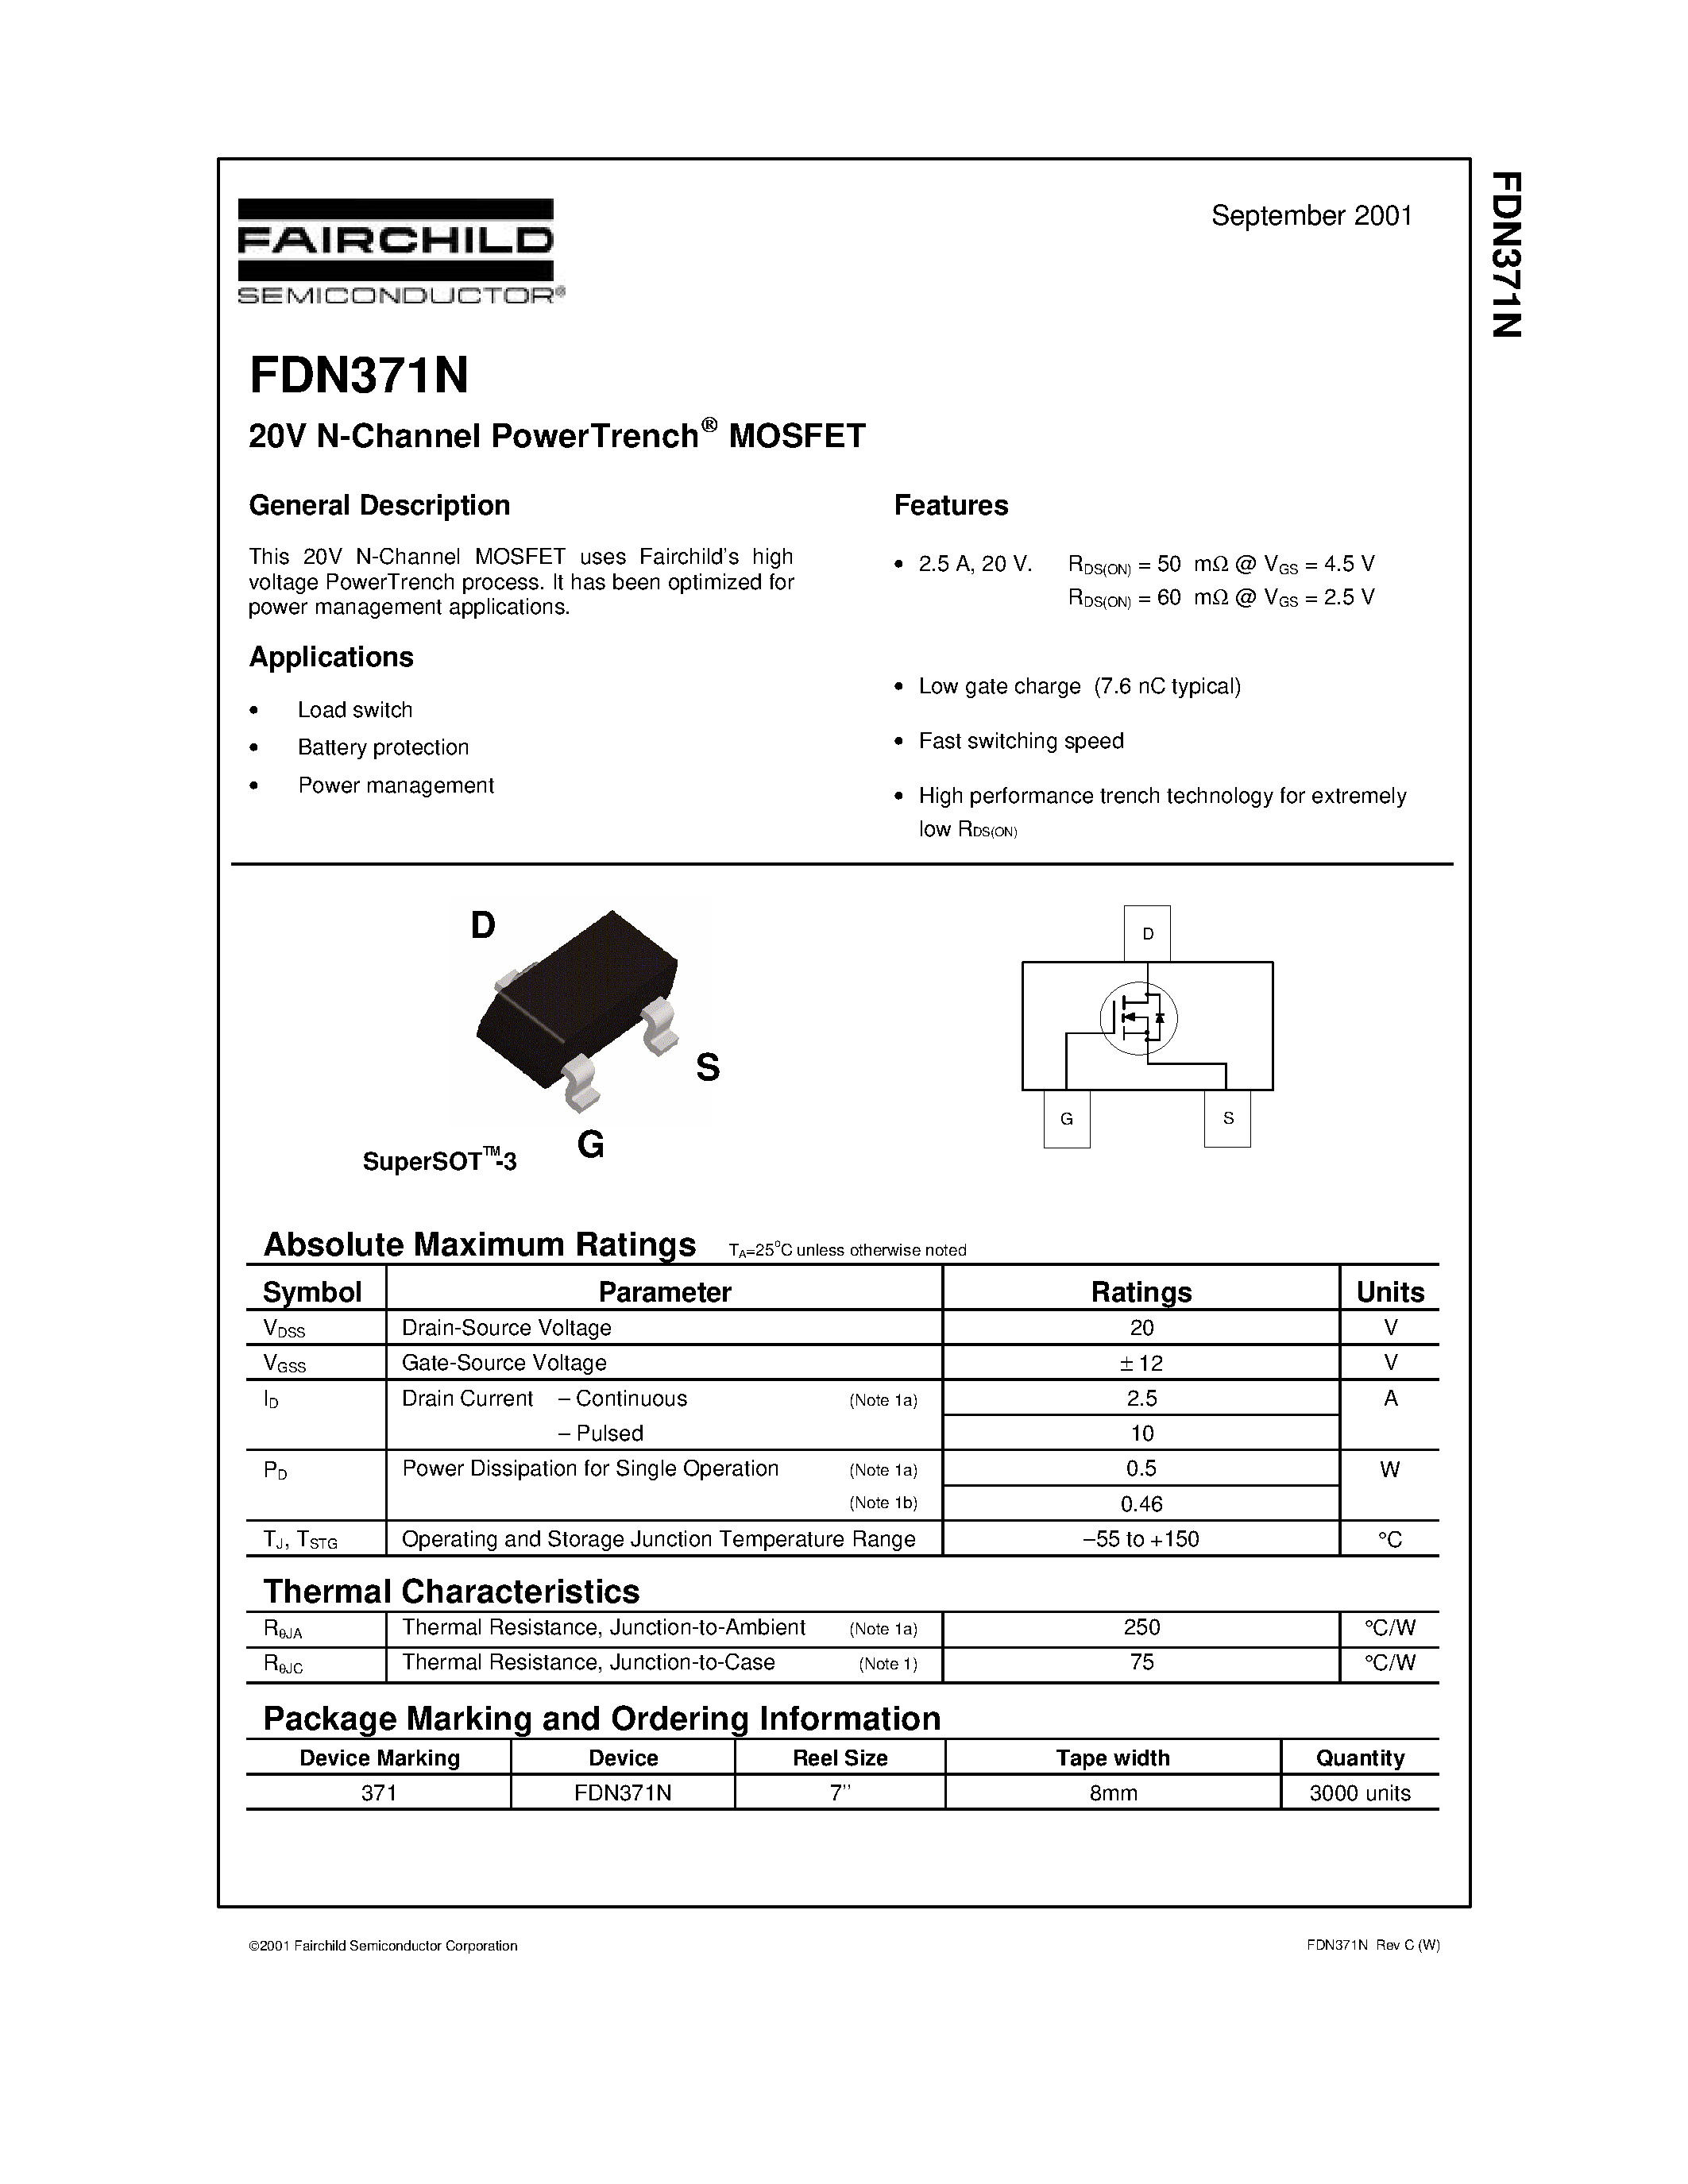 Datasheet FDN371N - 20V N-Channel PowerTrench MOSFET page 1